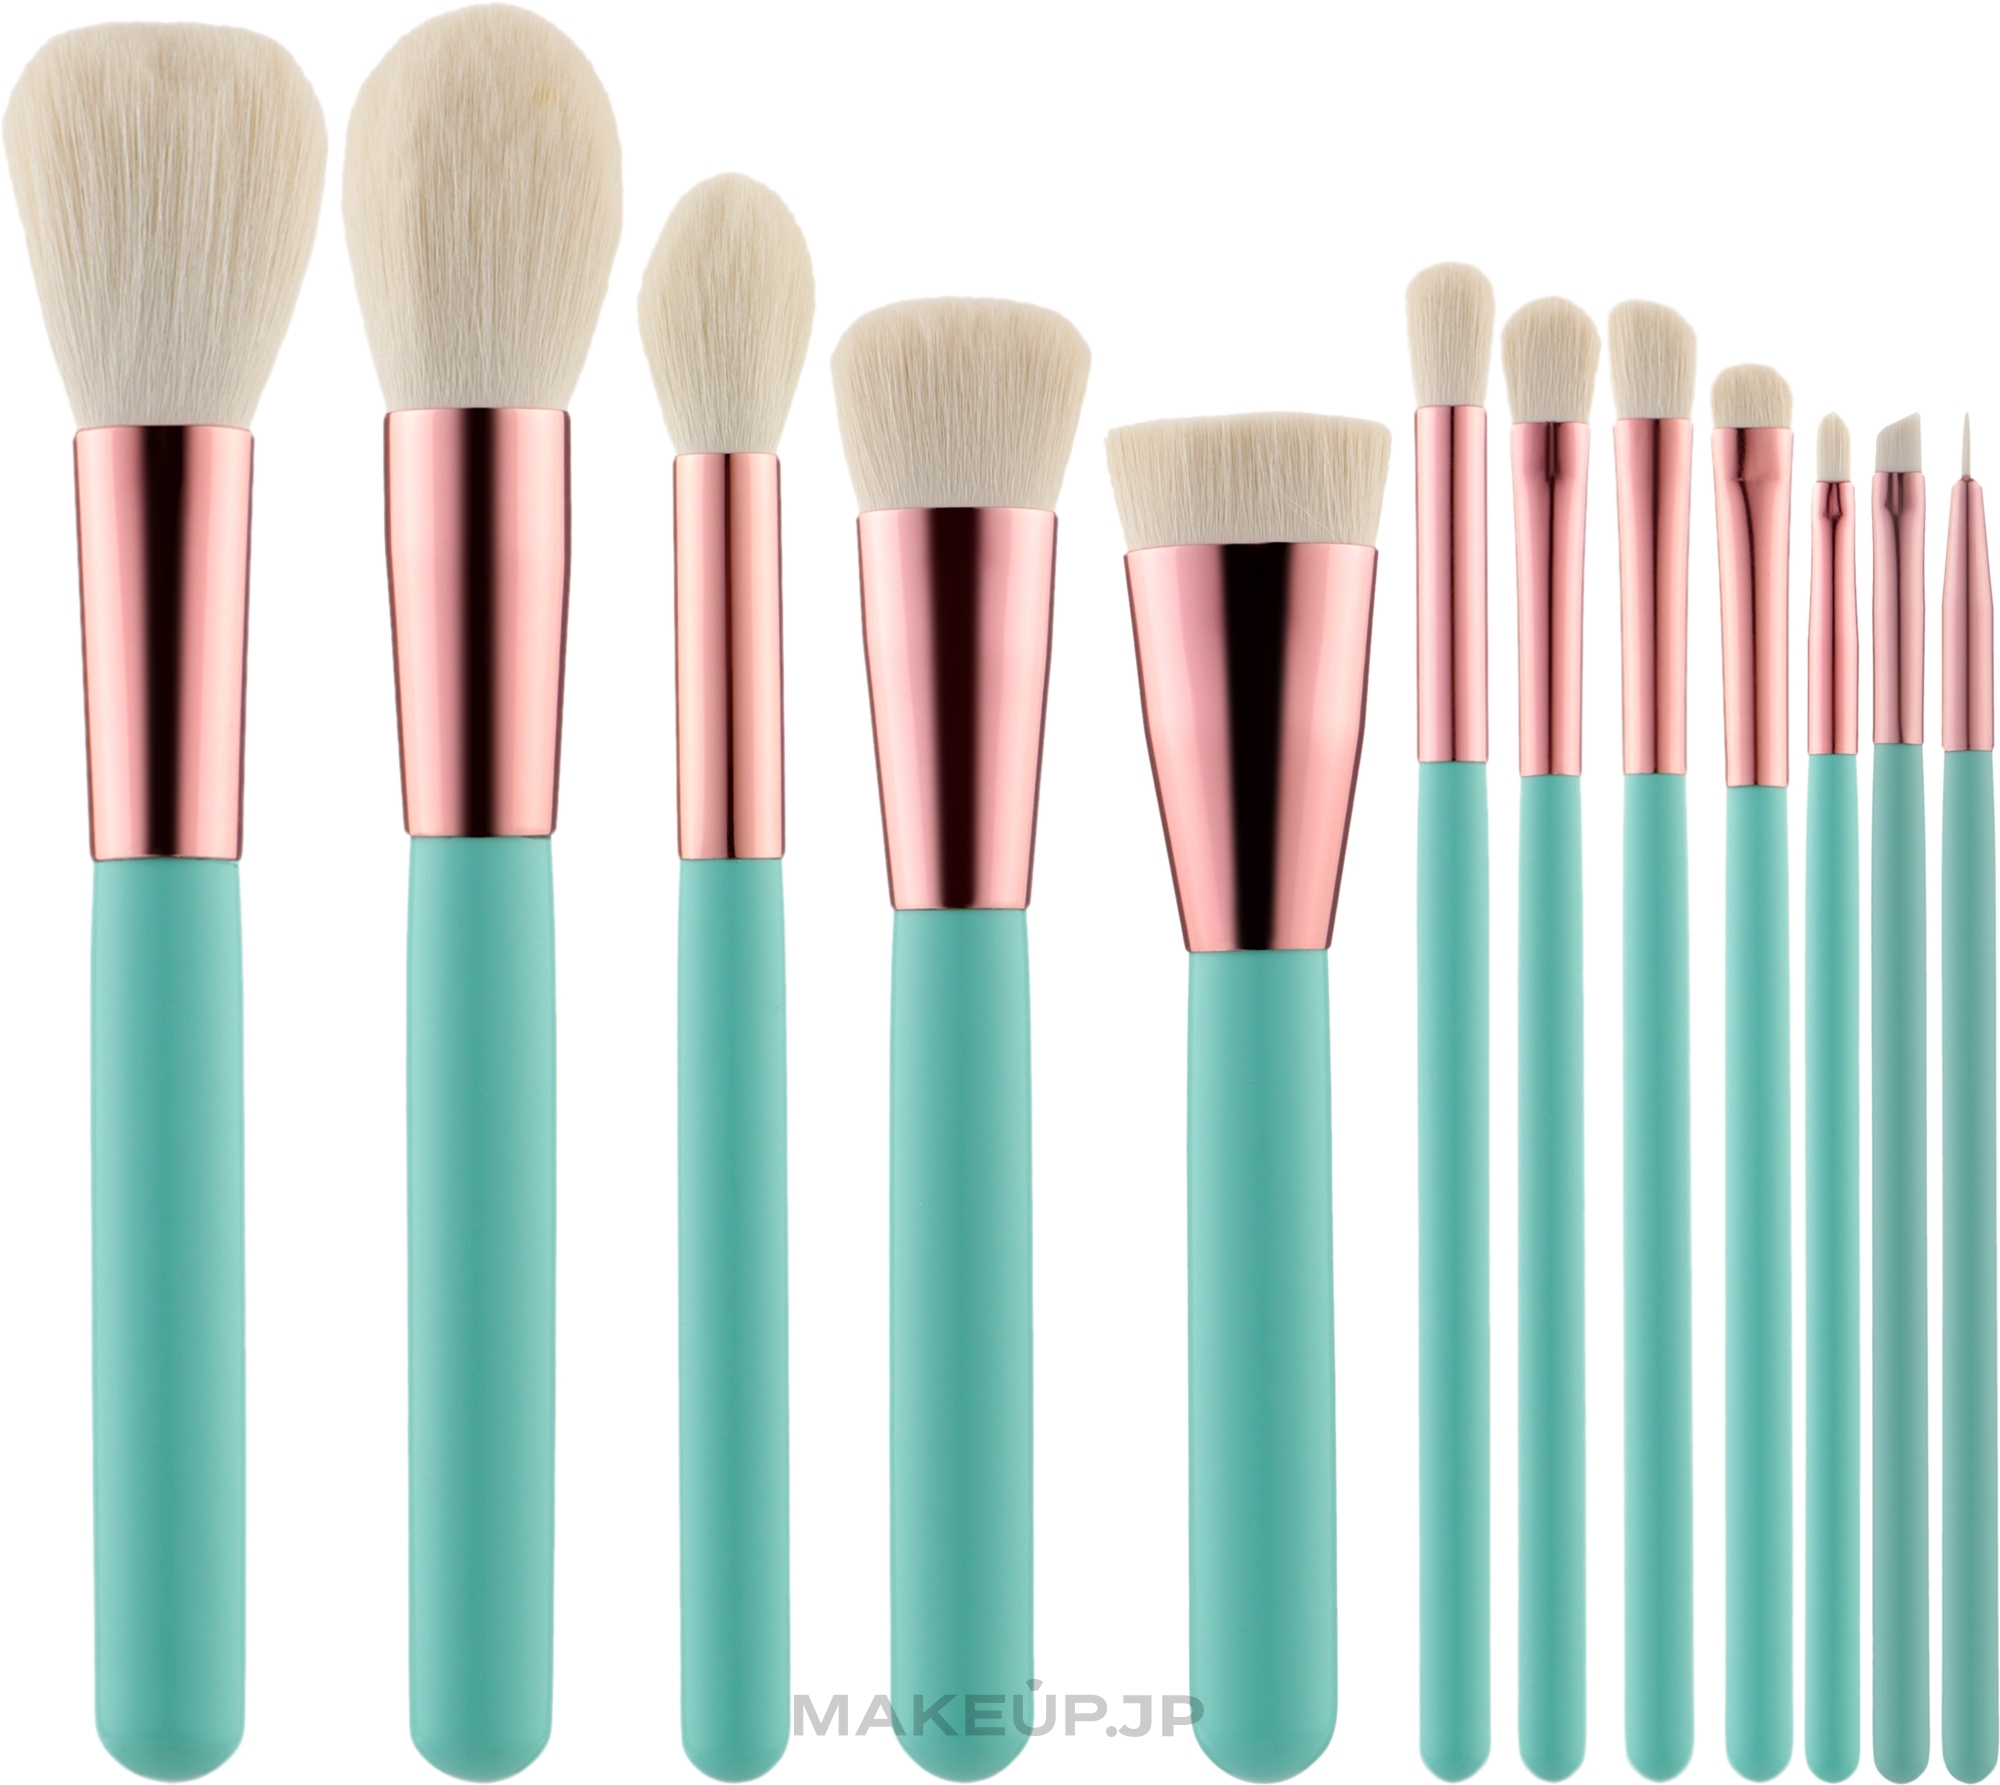 Makeup Brush Set with Case, 12 pcs - Tools For Beauty MiMo Turquoise Set — photo 12 szt.